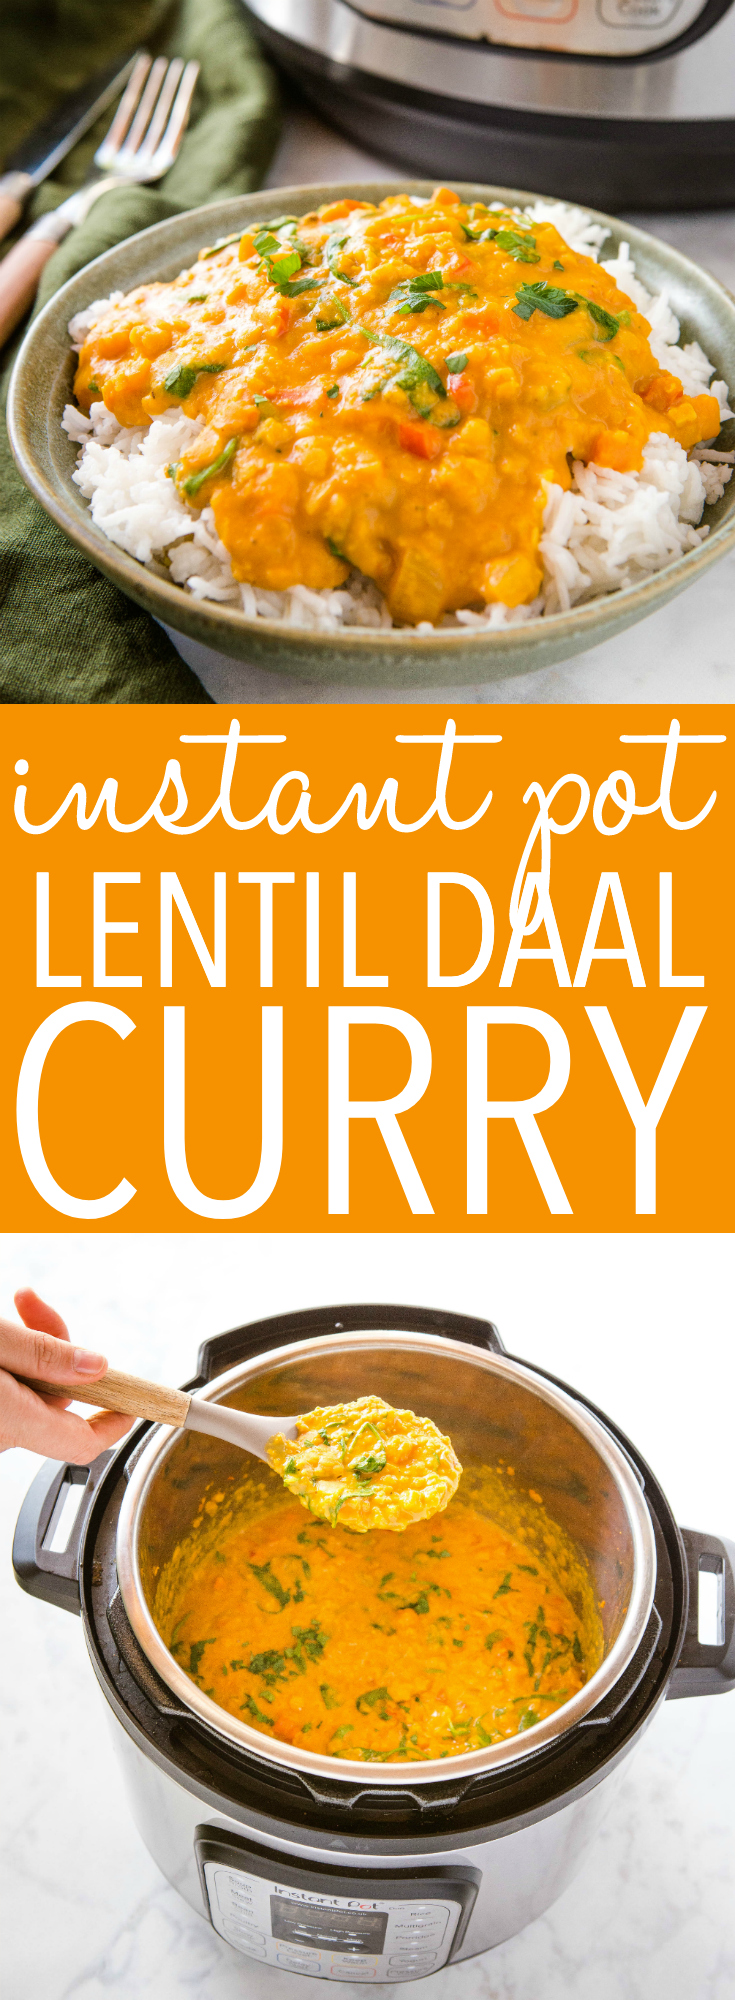 Instant Pot Curry with Lentils Recipe Pinterest